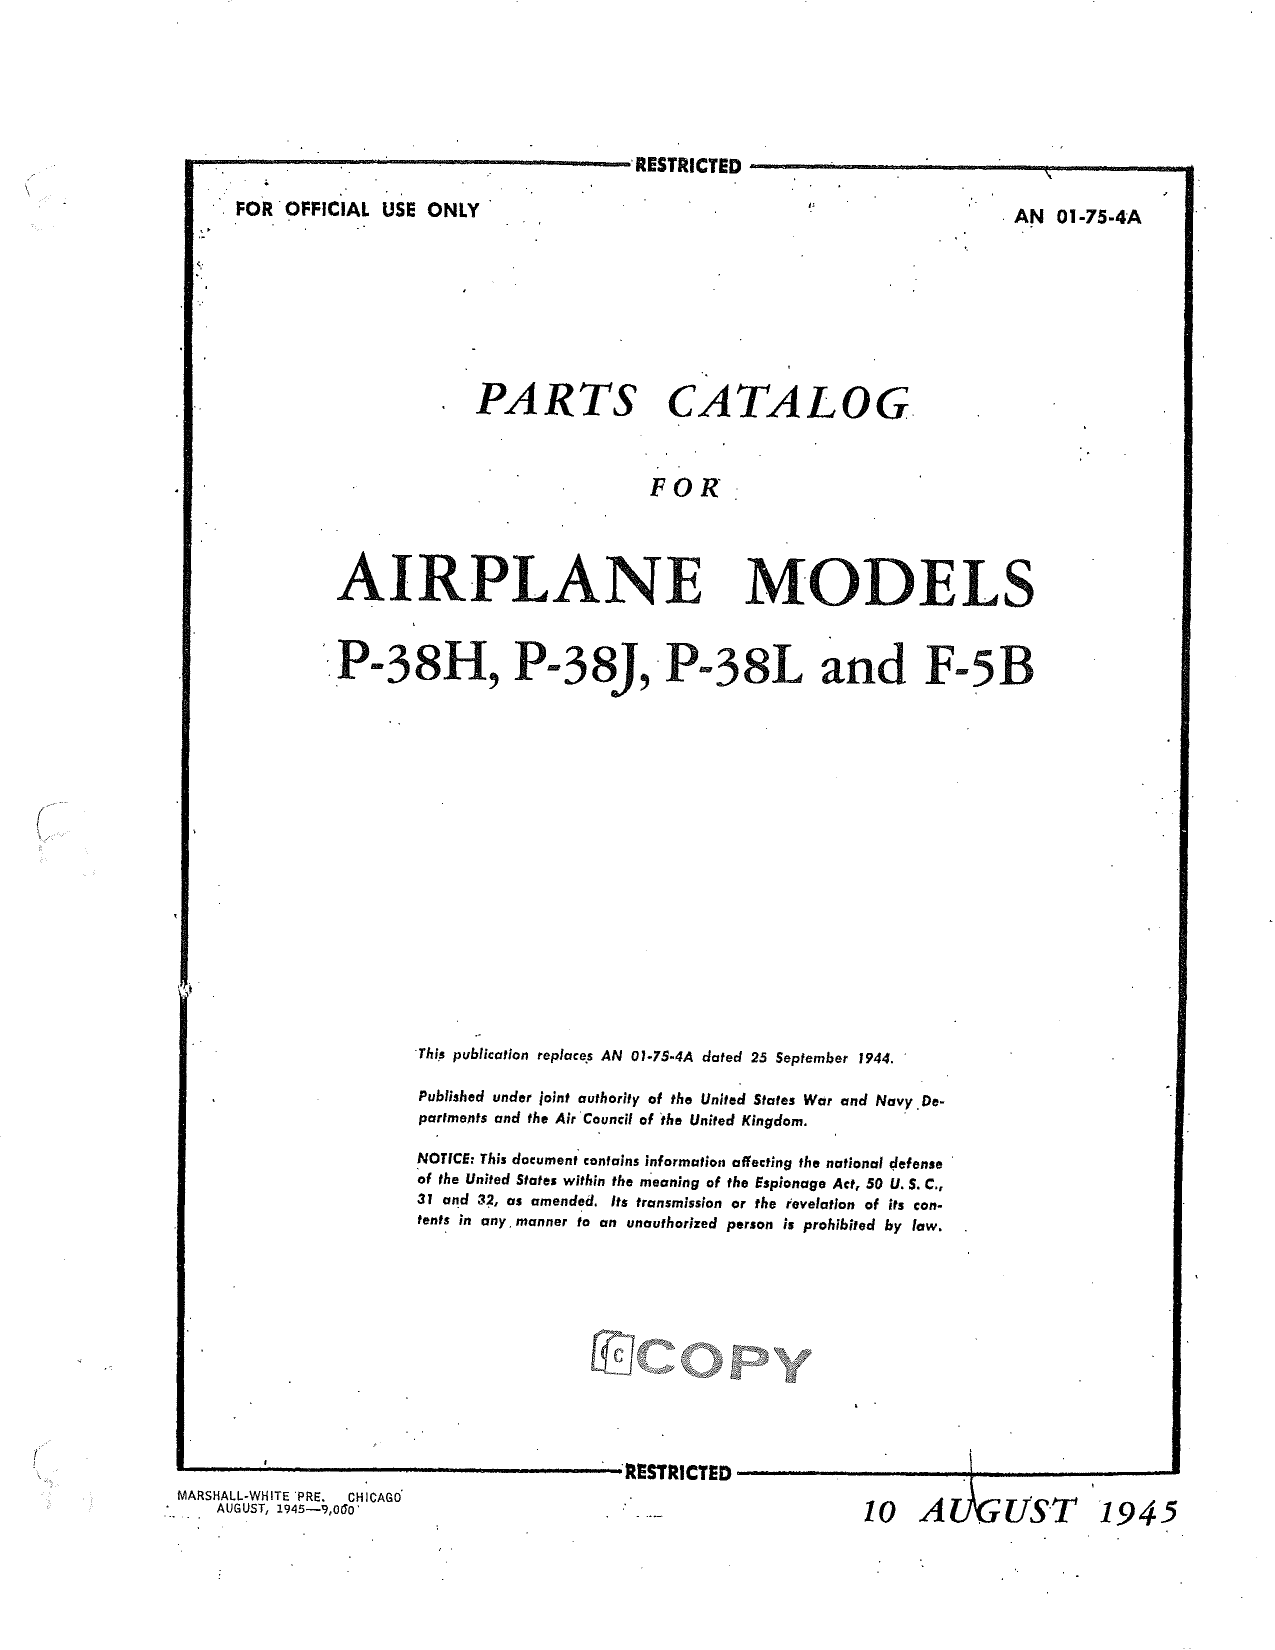 Sample page 1 from AirCorps Library document: Parts Catalog for Airplane Models P-38H, P-38J, P-38L, and F-5B